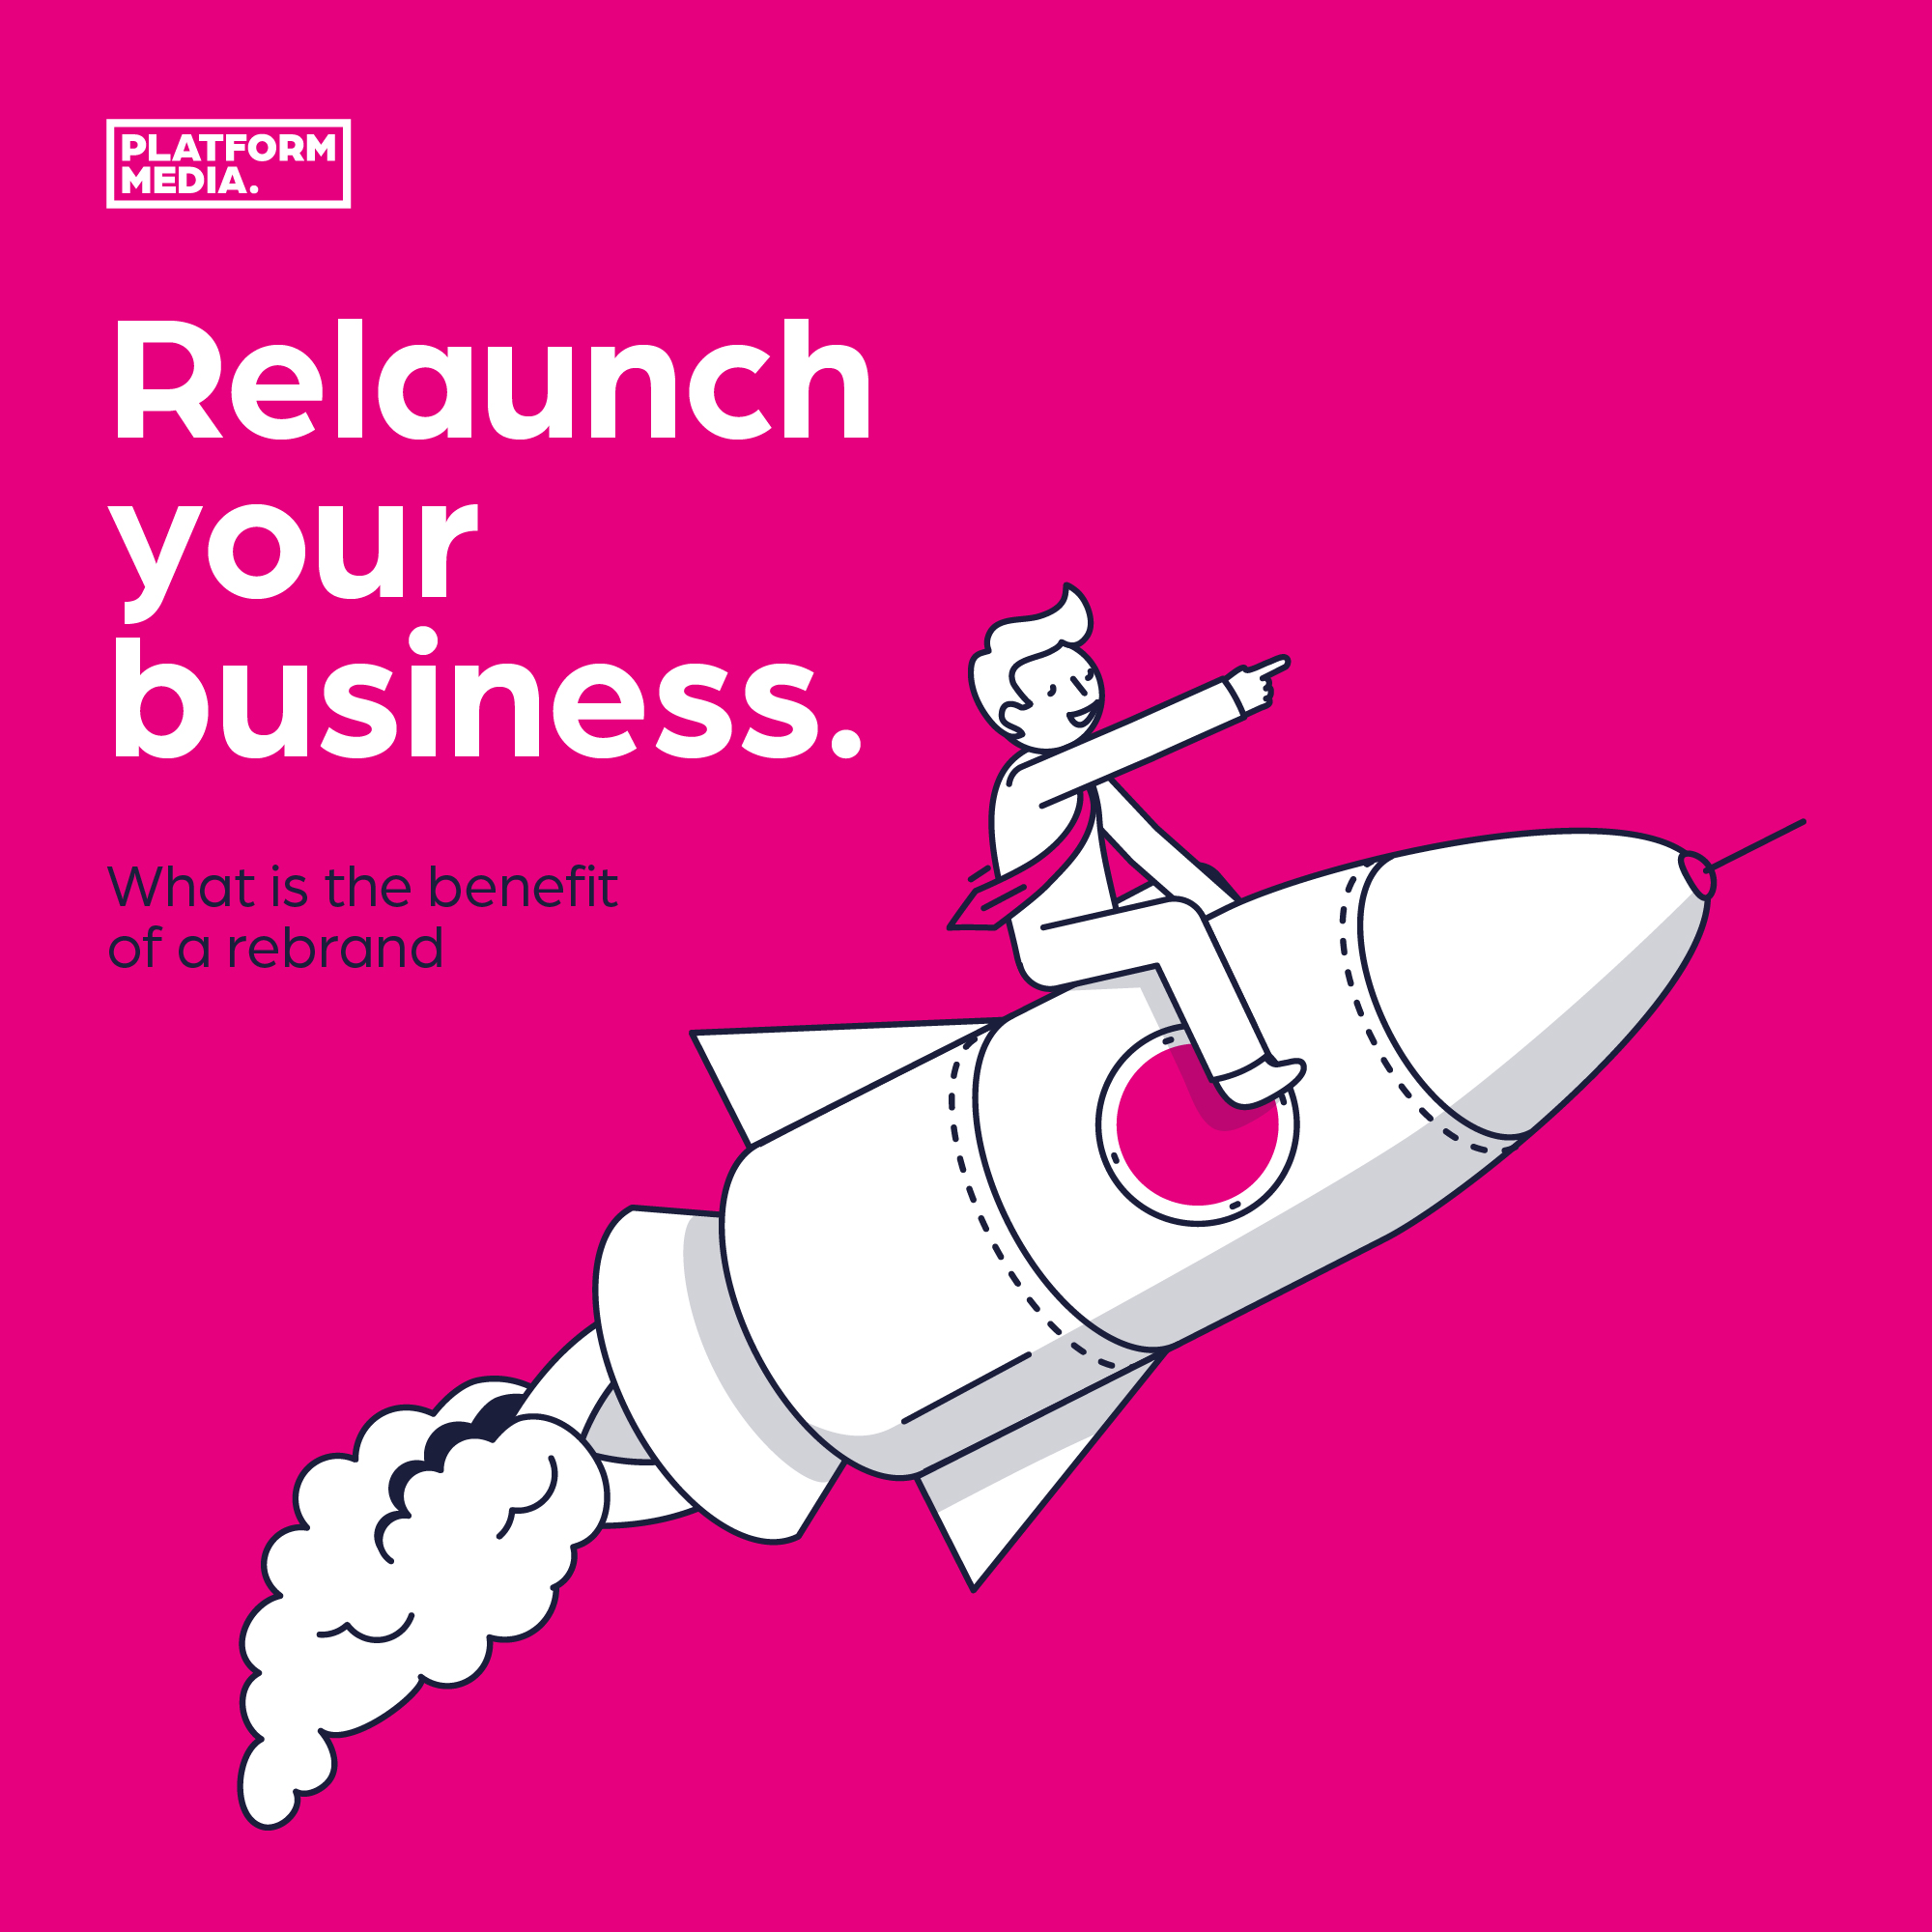 How a rebrand can relaunch your business